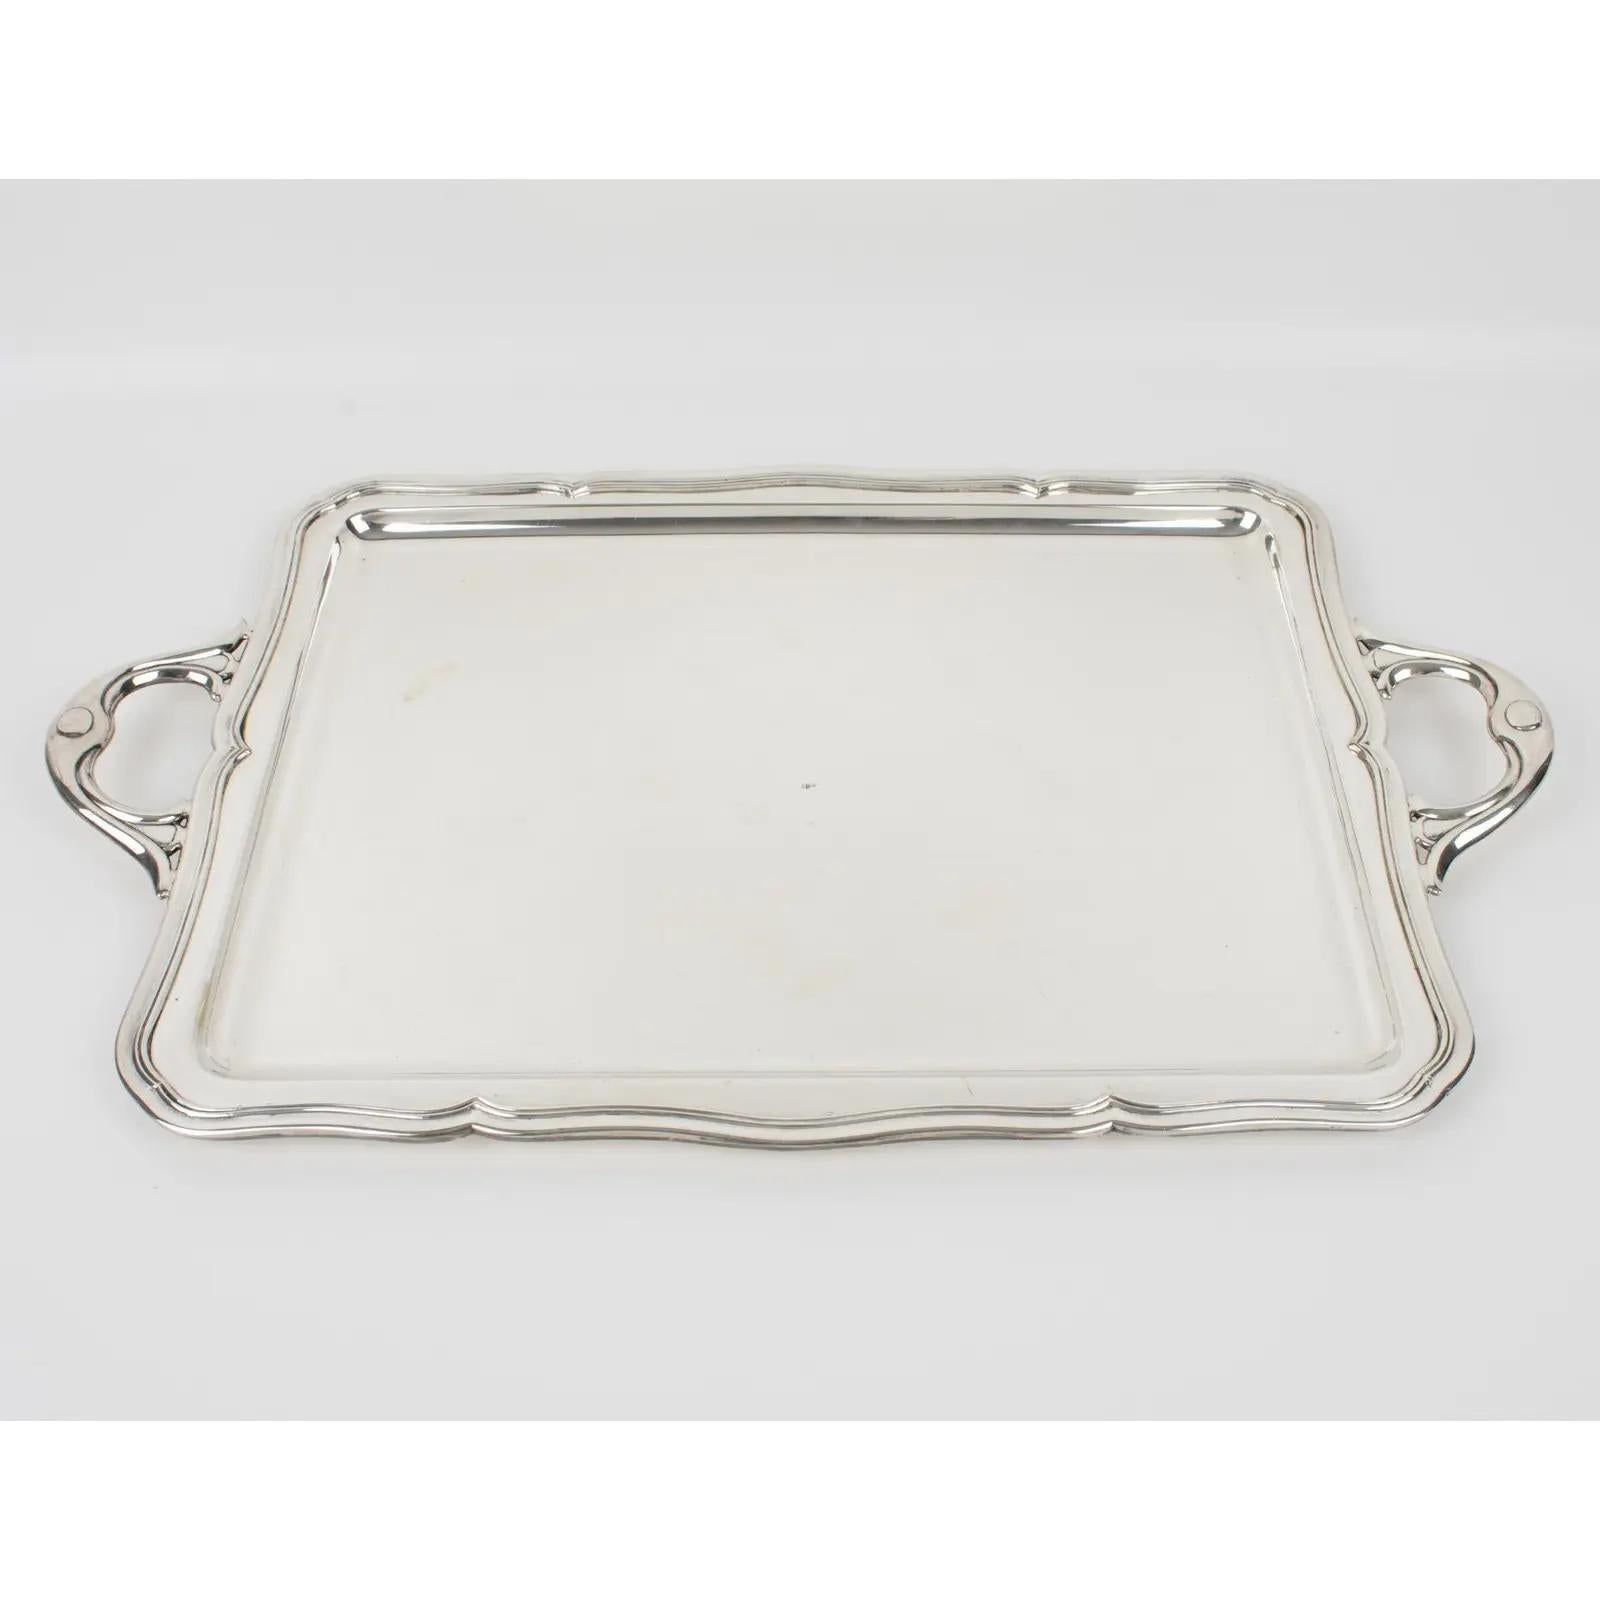 Spanish Modernist Alpaca Silver Plate Serving Barware Tray For Sale